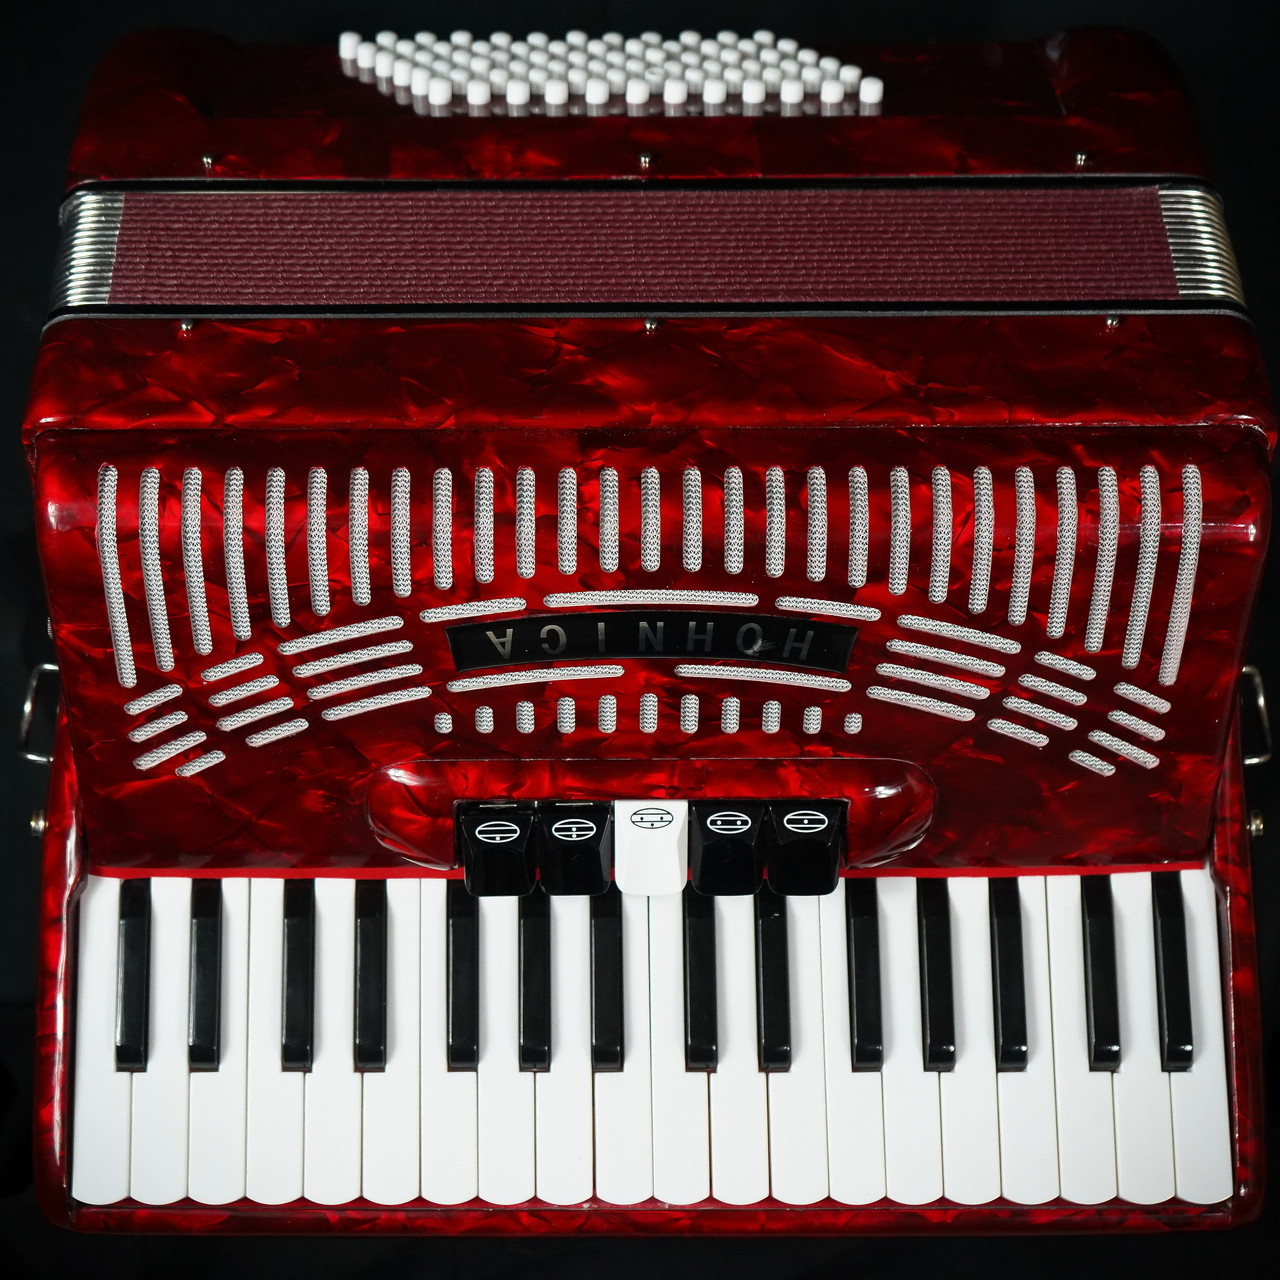 Hohner Hohnica 1305 72 Bass Piano Accordion - Pearl Red (Brand New)